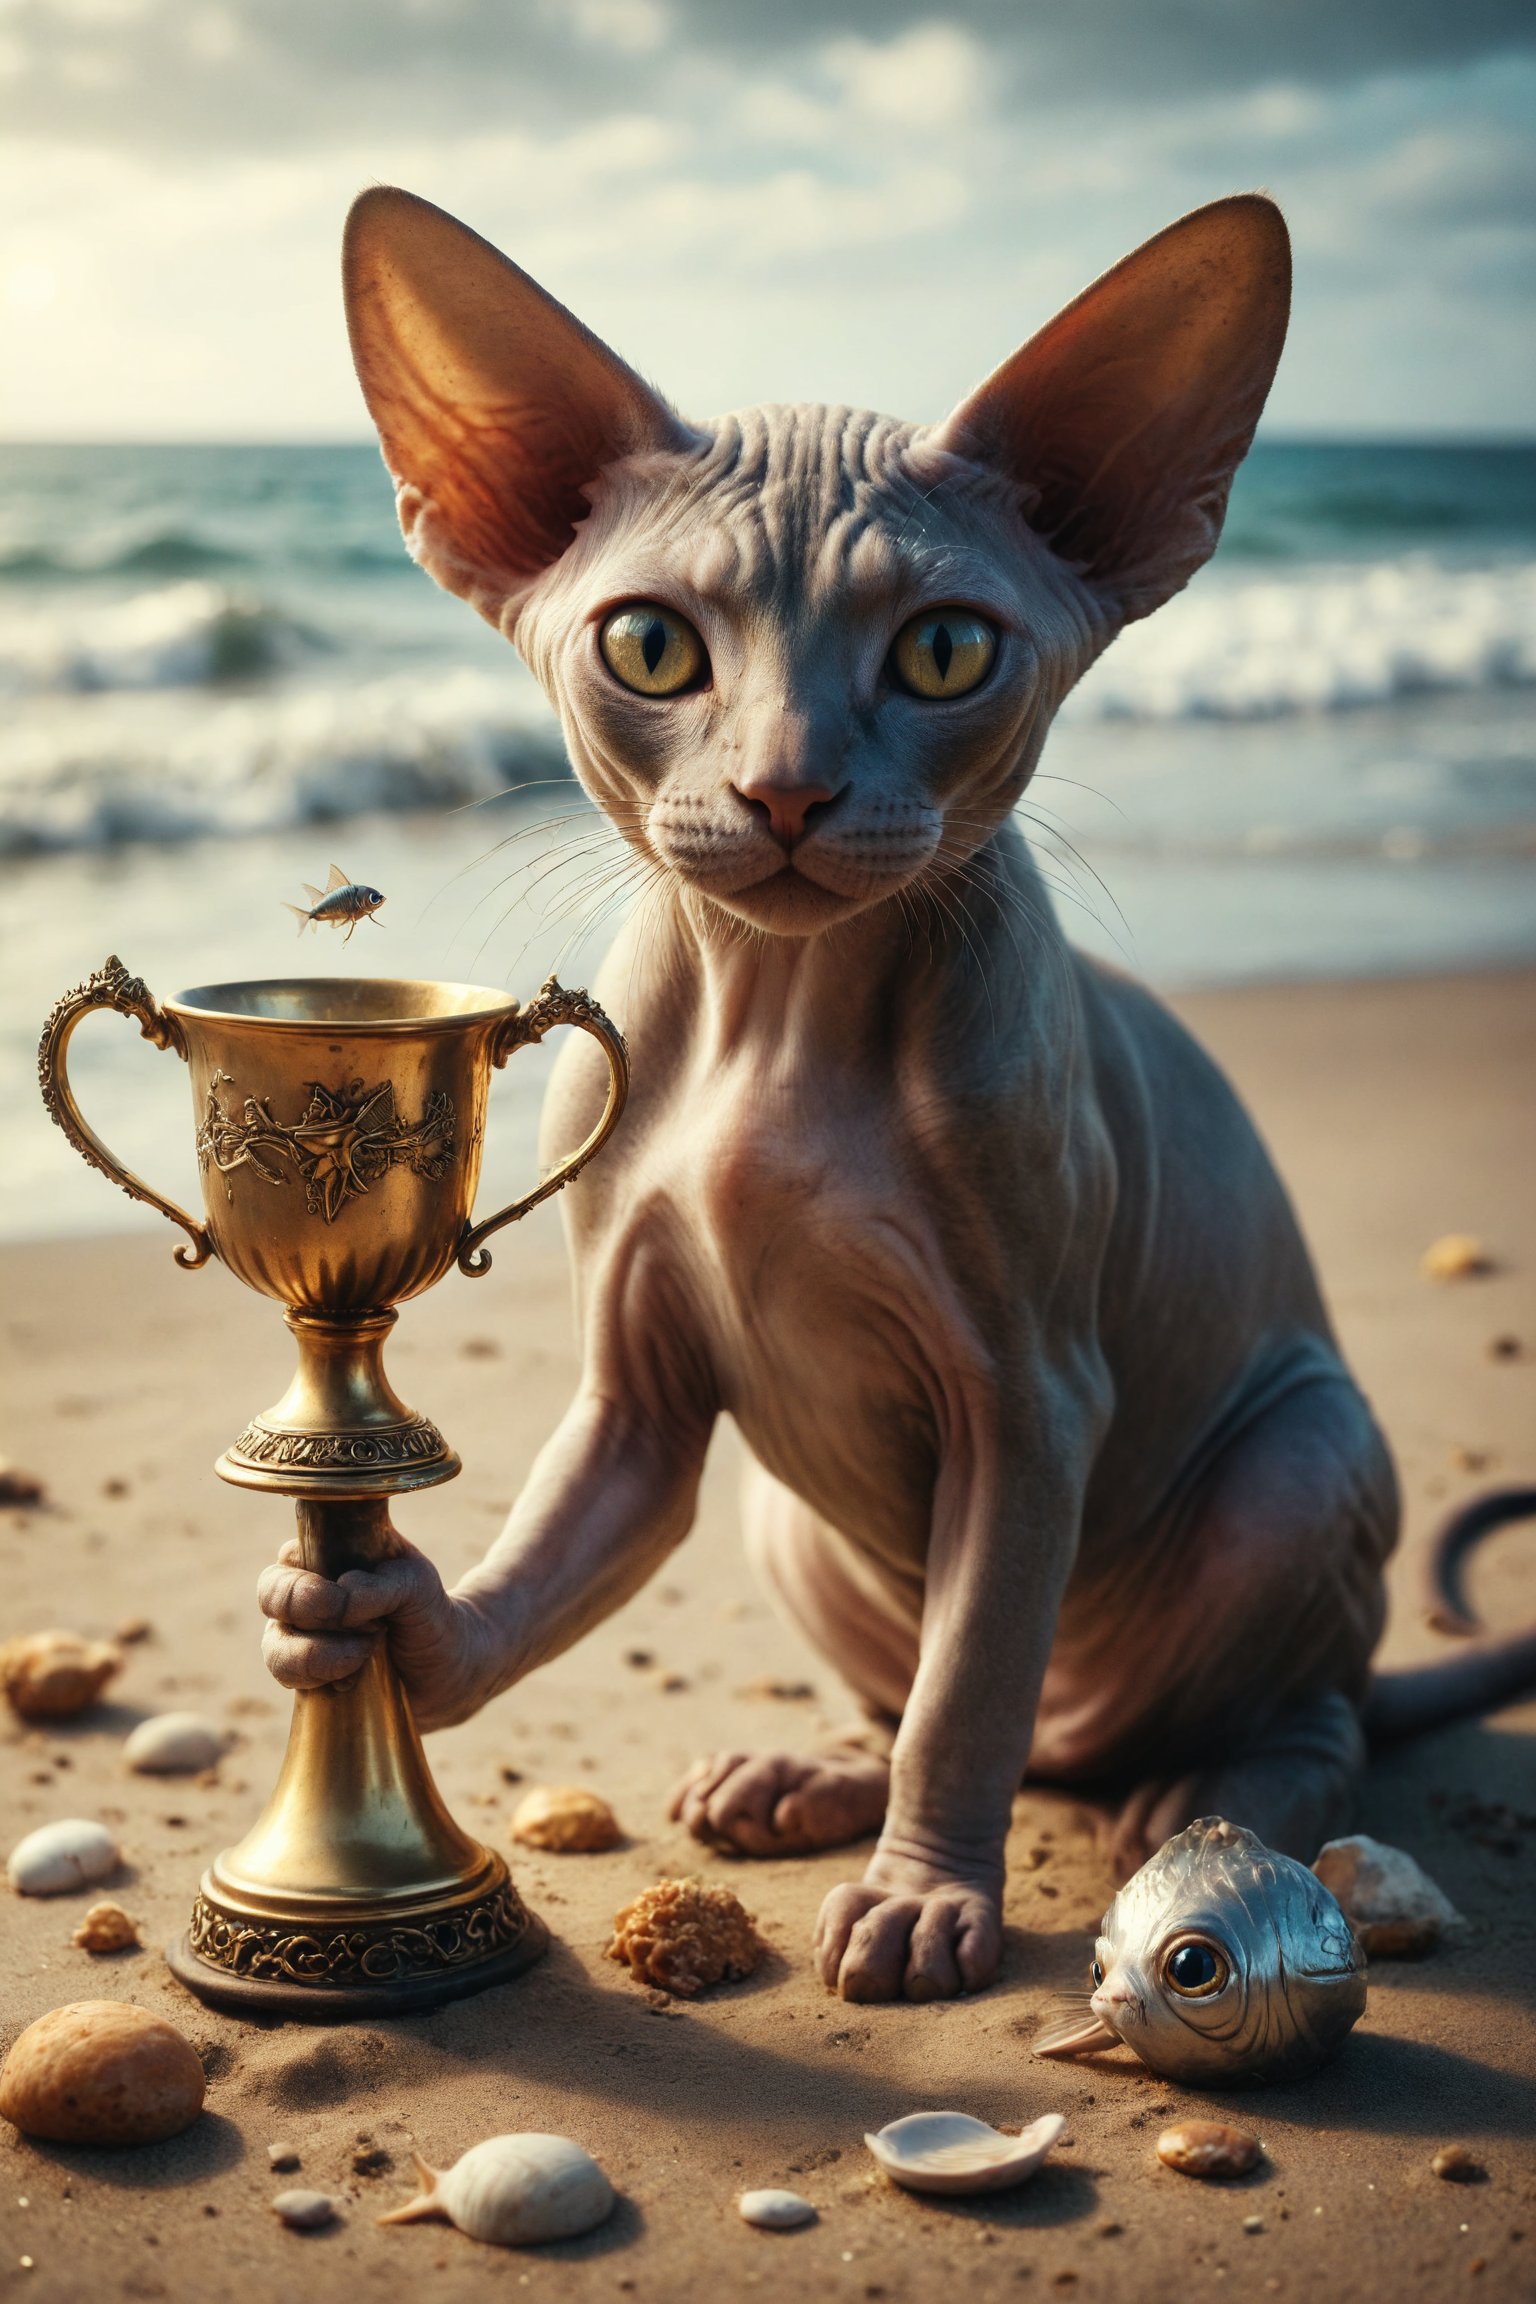 Design an image of a Sphynx cat on a sandy beach and sea holding a throphye metal golden  cup from which a fish emerges